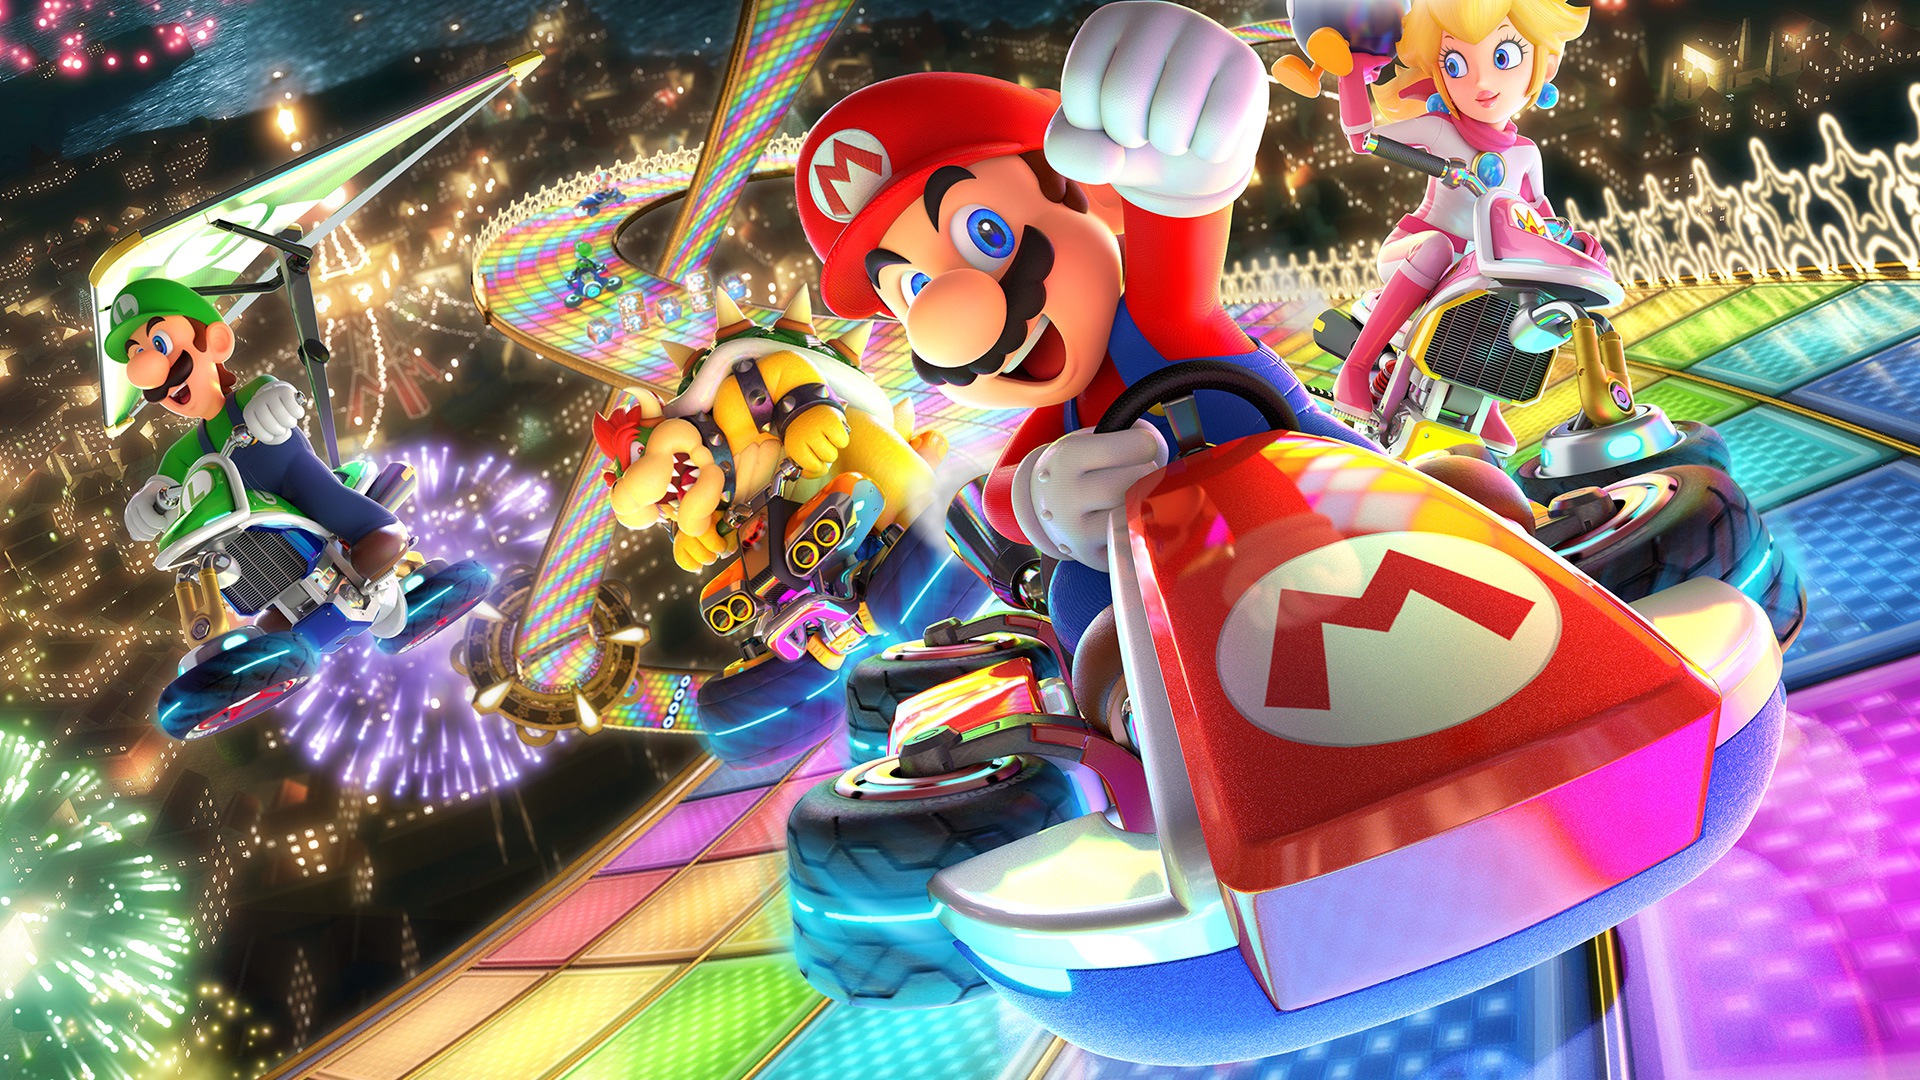 Mario Kart 8 Wallpaper Hd 110 images in Collection Page 1 1920x1080